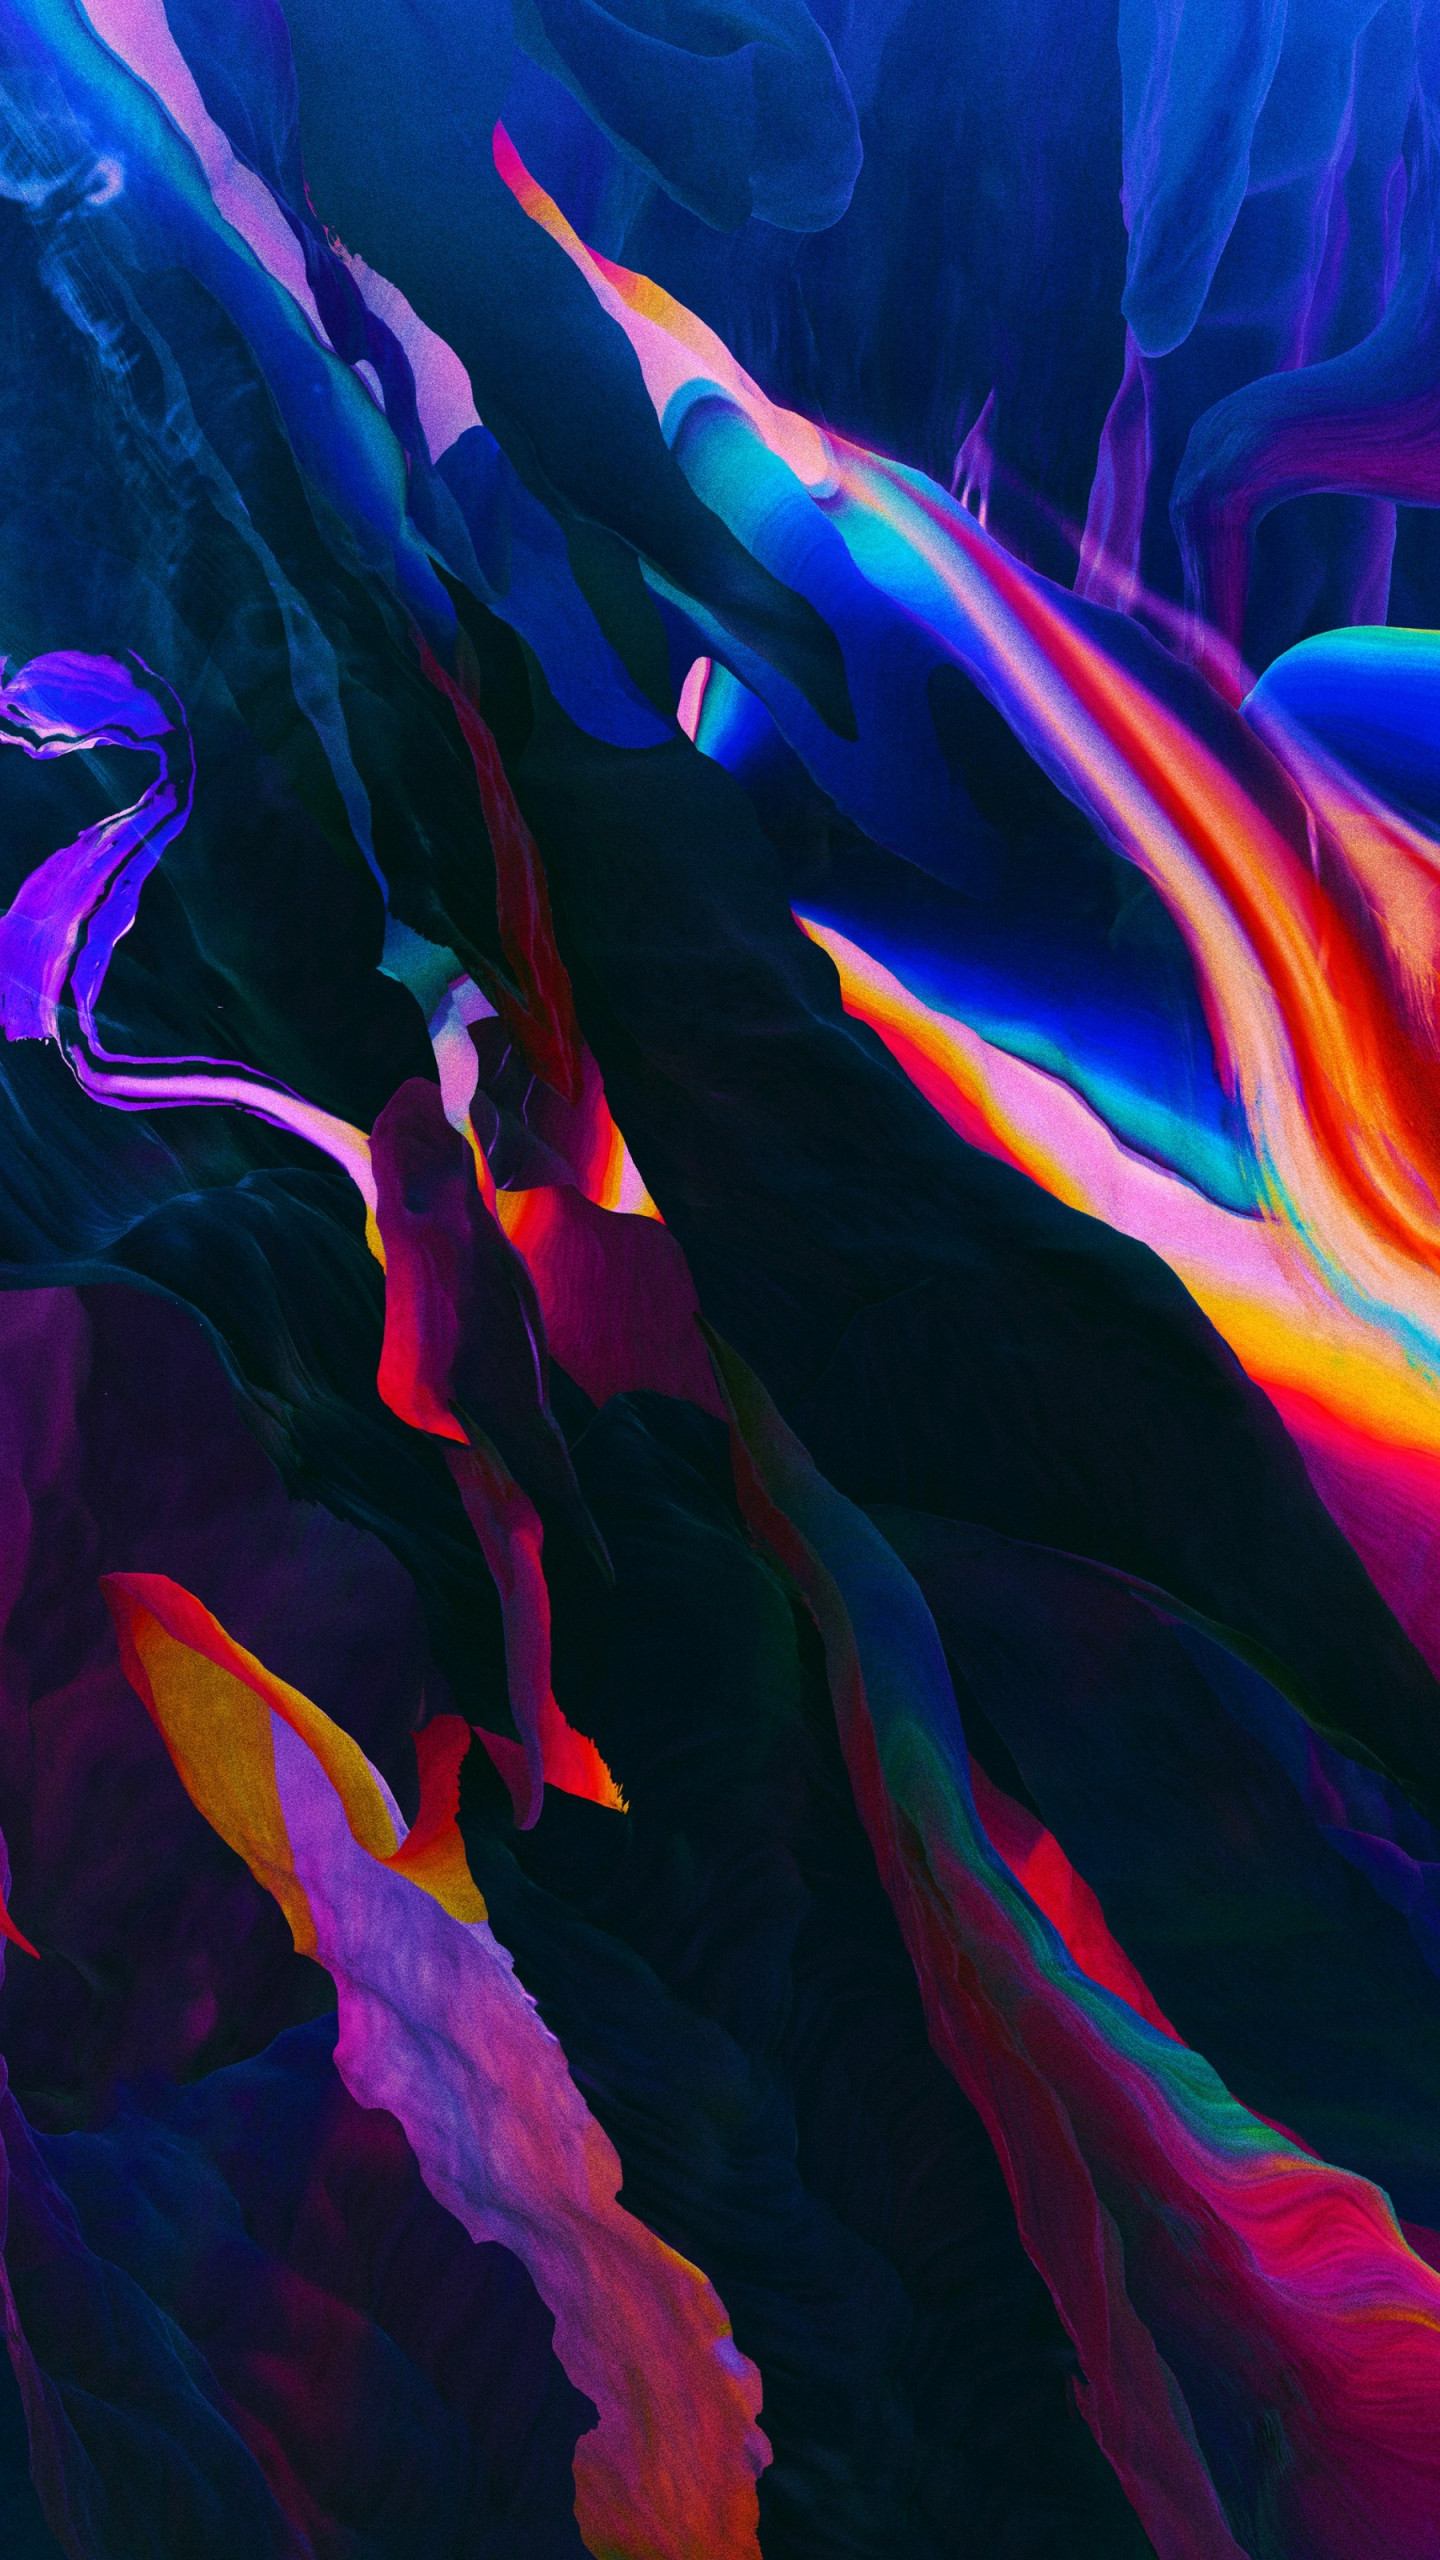 Download wallpaper: Abstract colorful 1440x2560